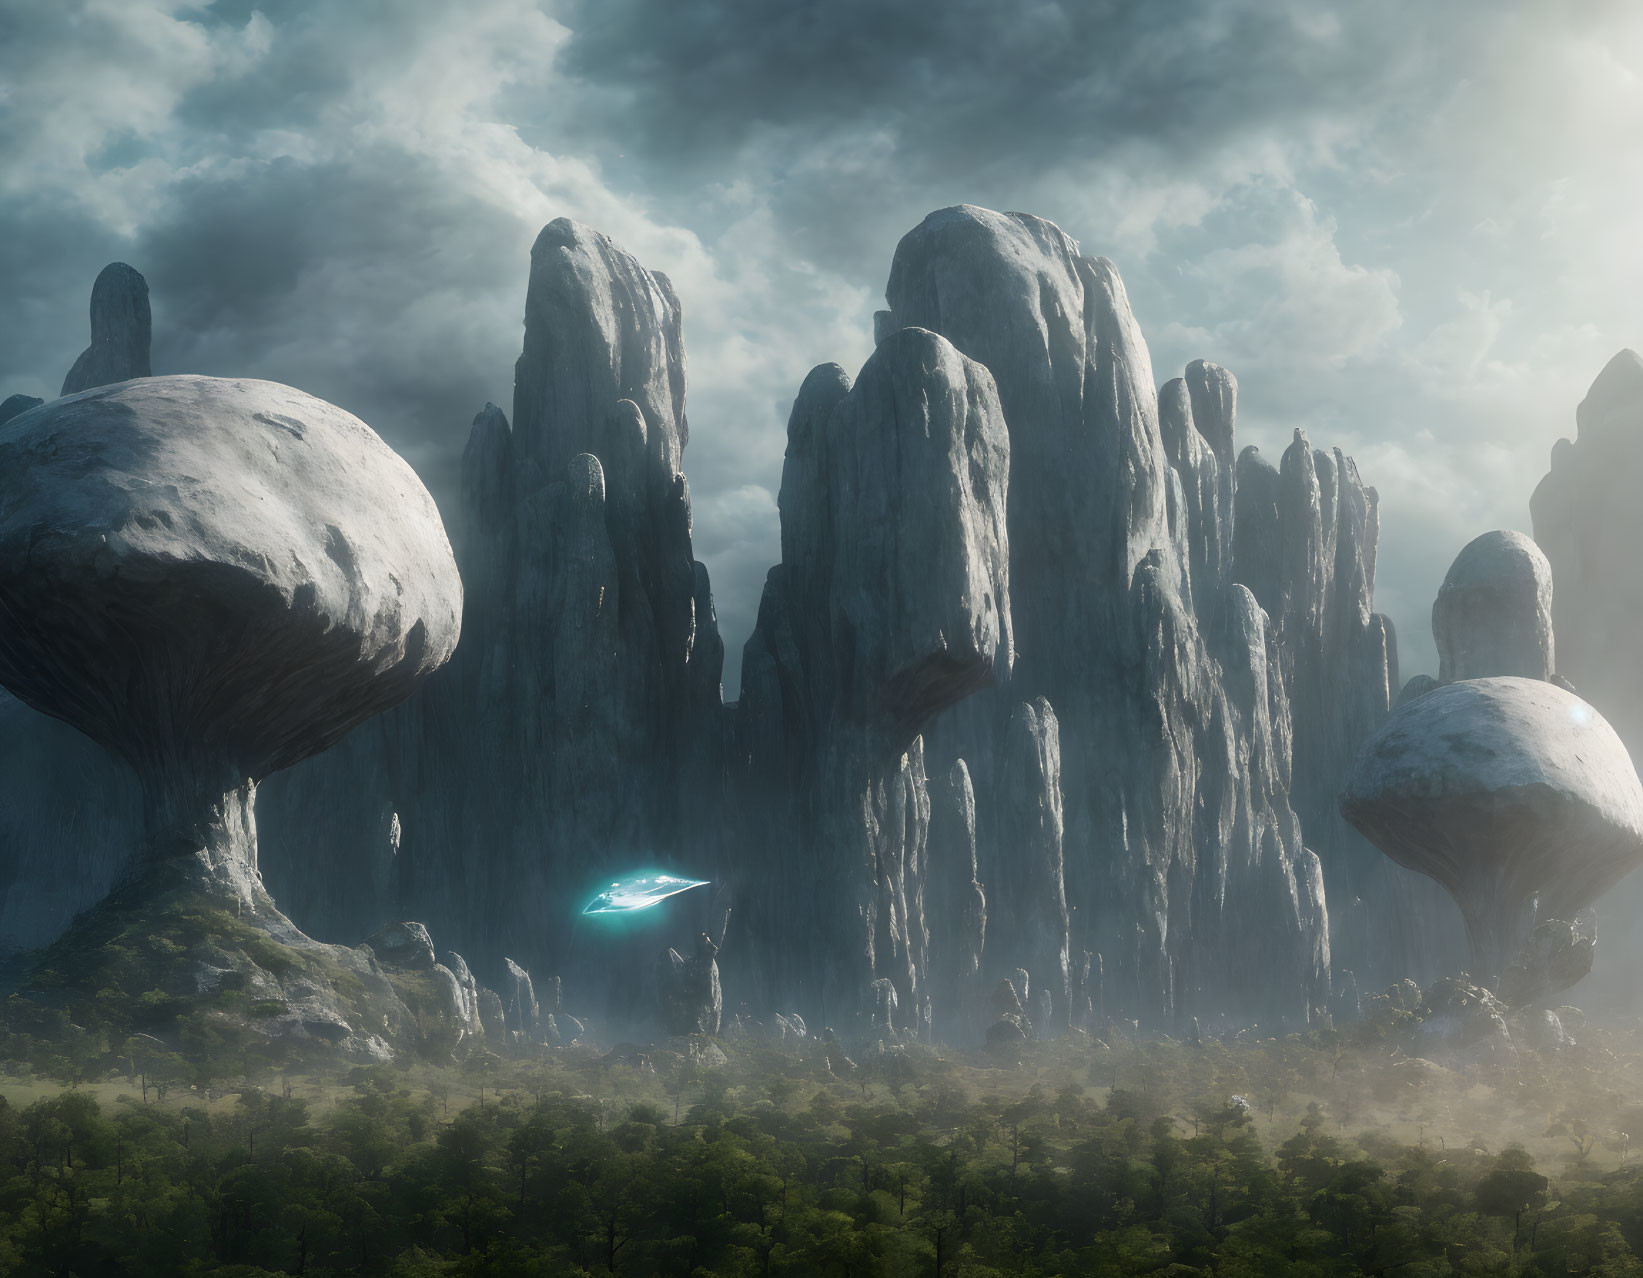 Futuristic spaceship in misty forest with rock formations